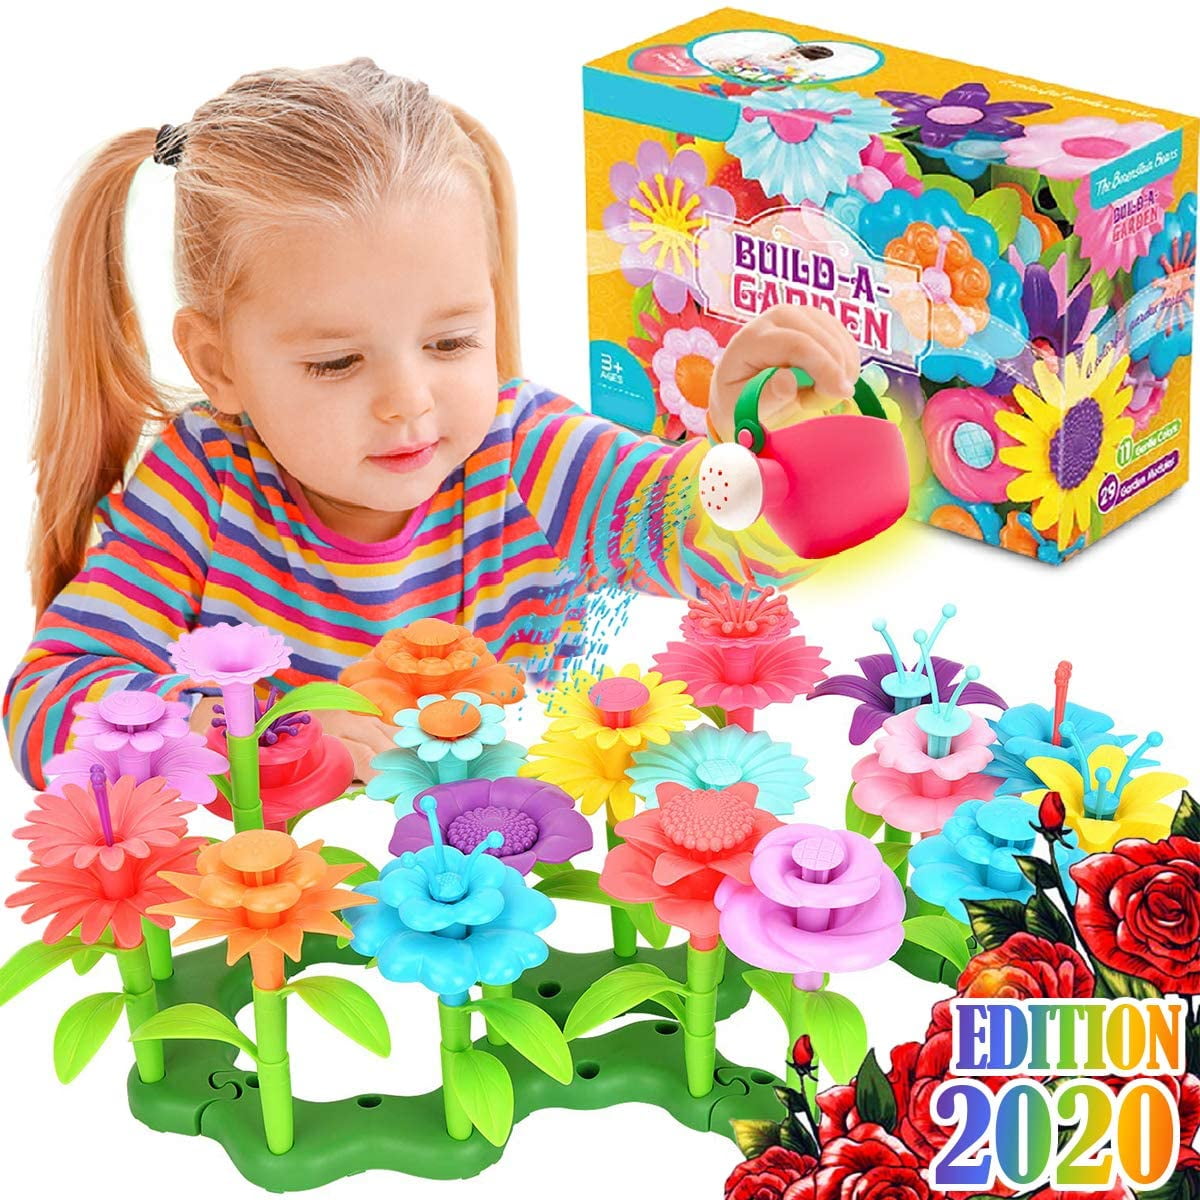 Details about   Educational Learning Toys Girls Kids Toddlers Age 3 4 5 6 7 8 Years Old New Set 